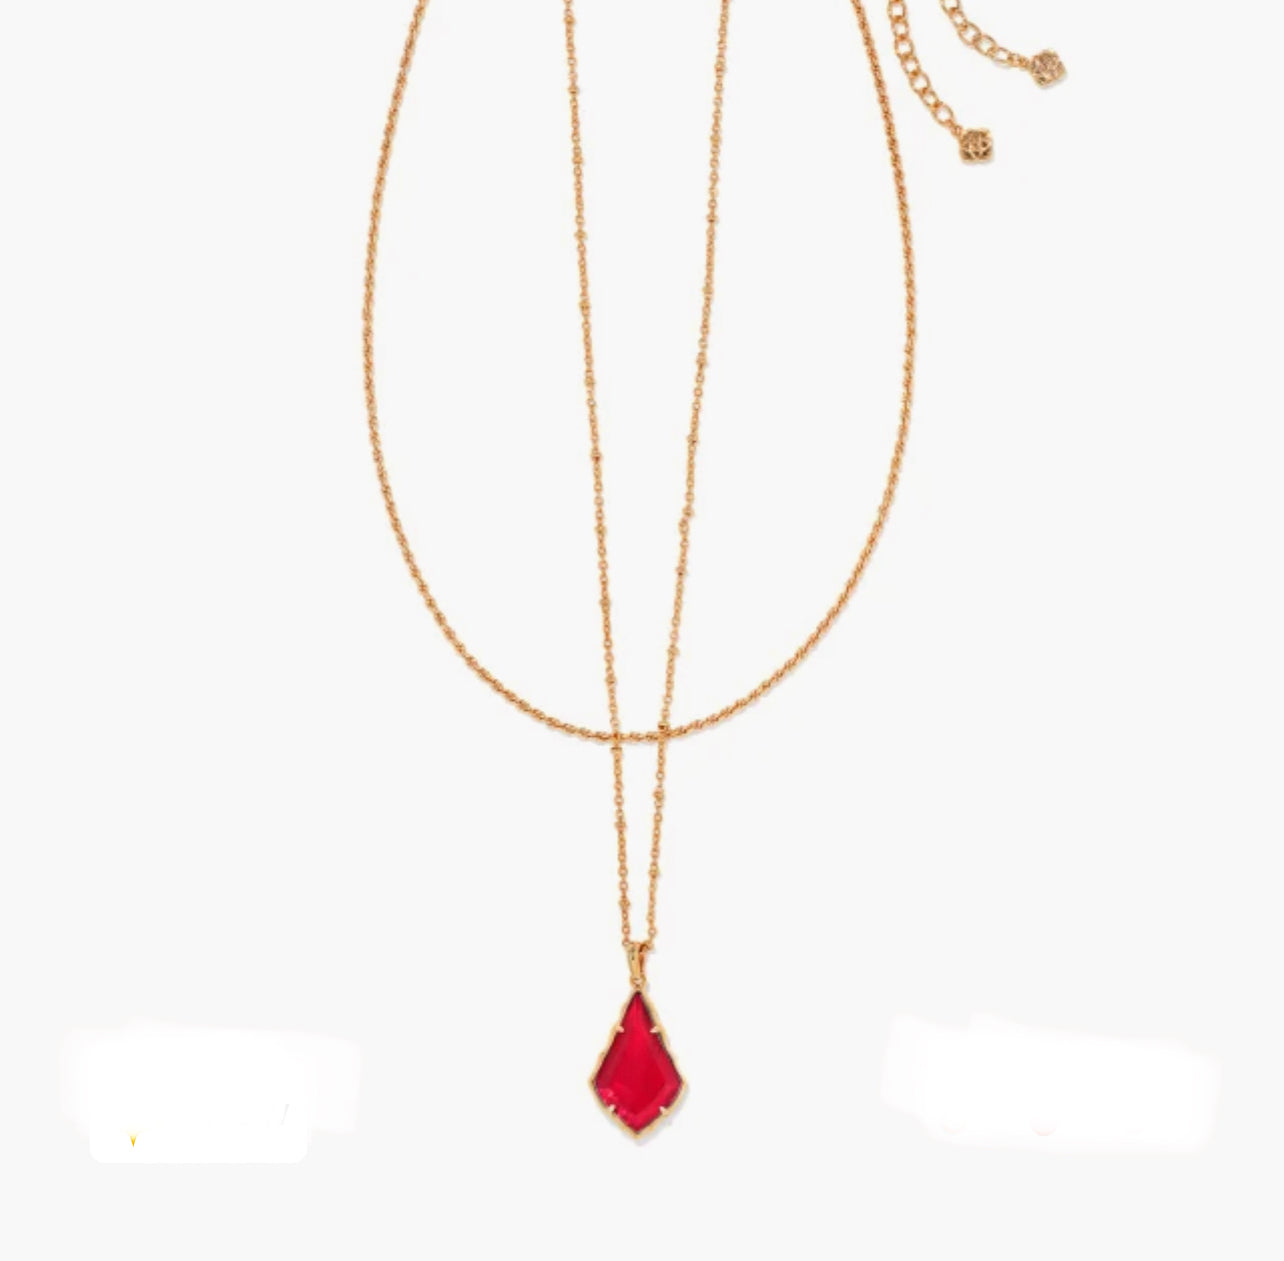 Kendra Scott-Faceted Alex Gold Convertible Necklace in Cranberry Illusion 9608802913